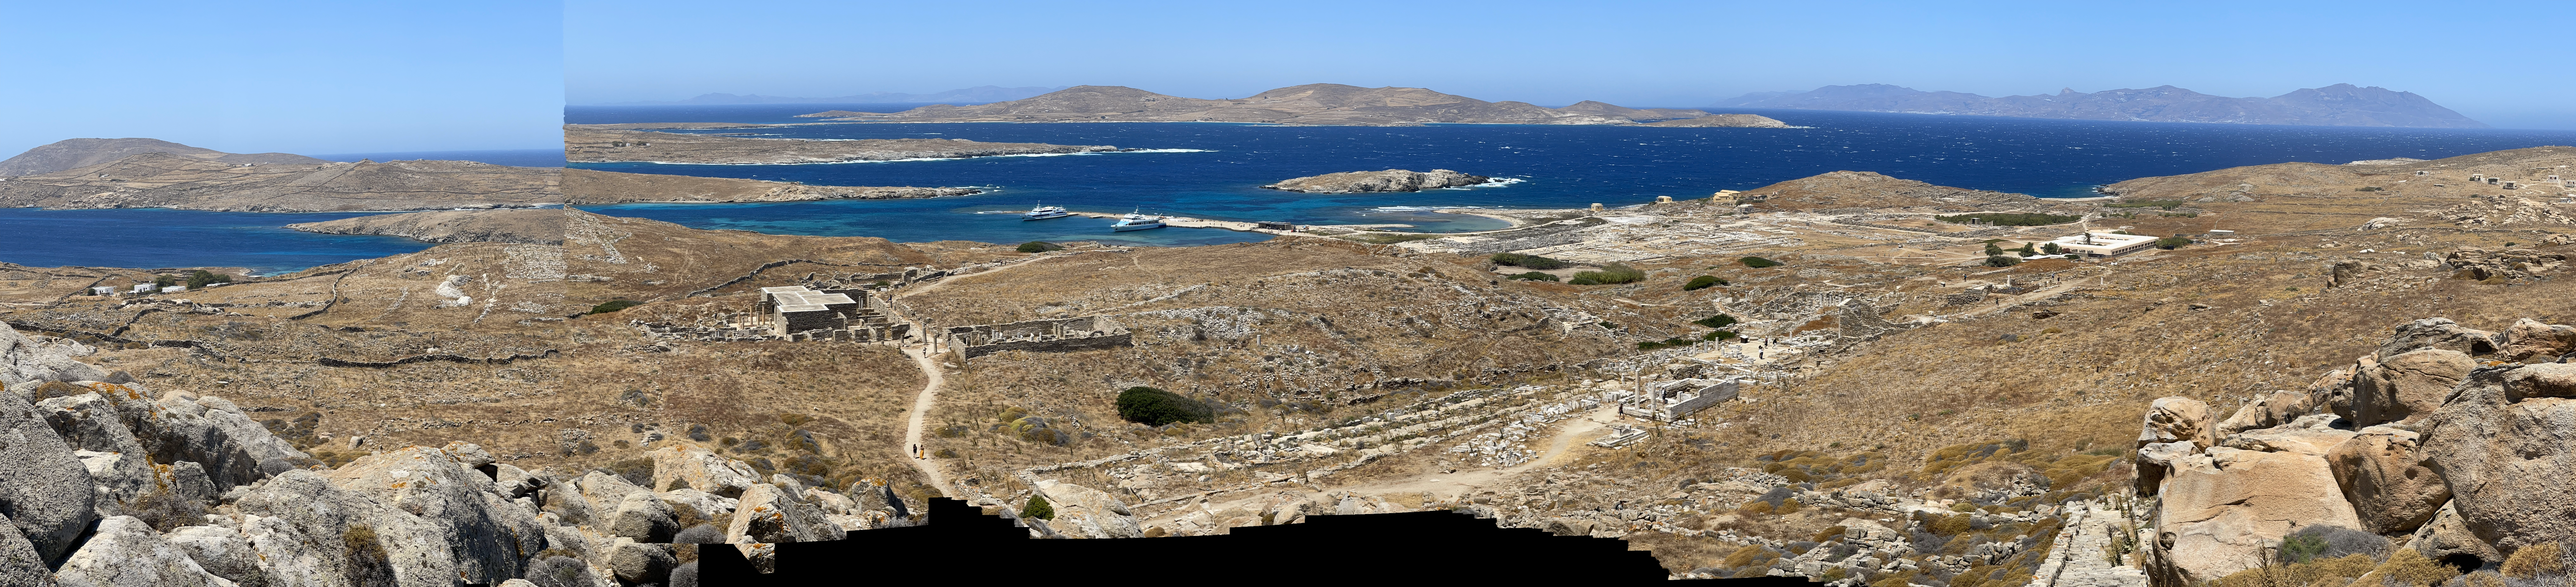 The Cyclades seen from Delos